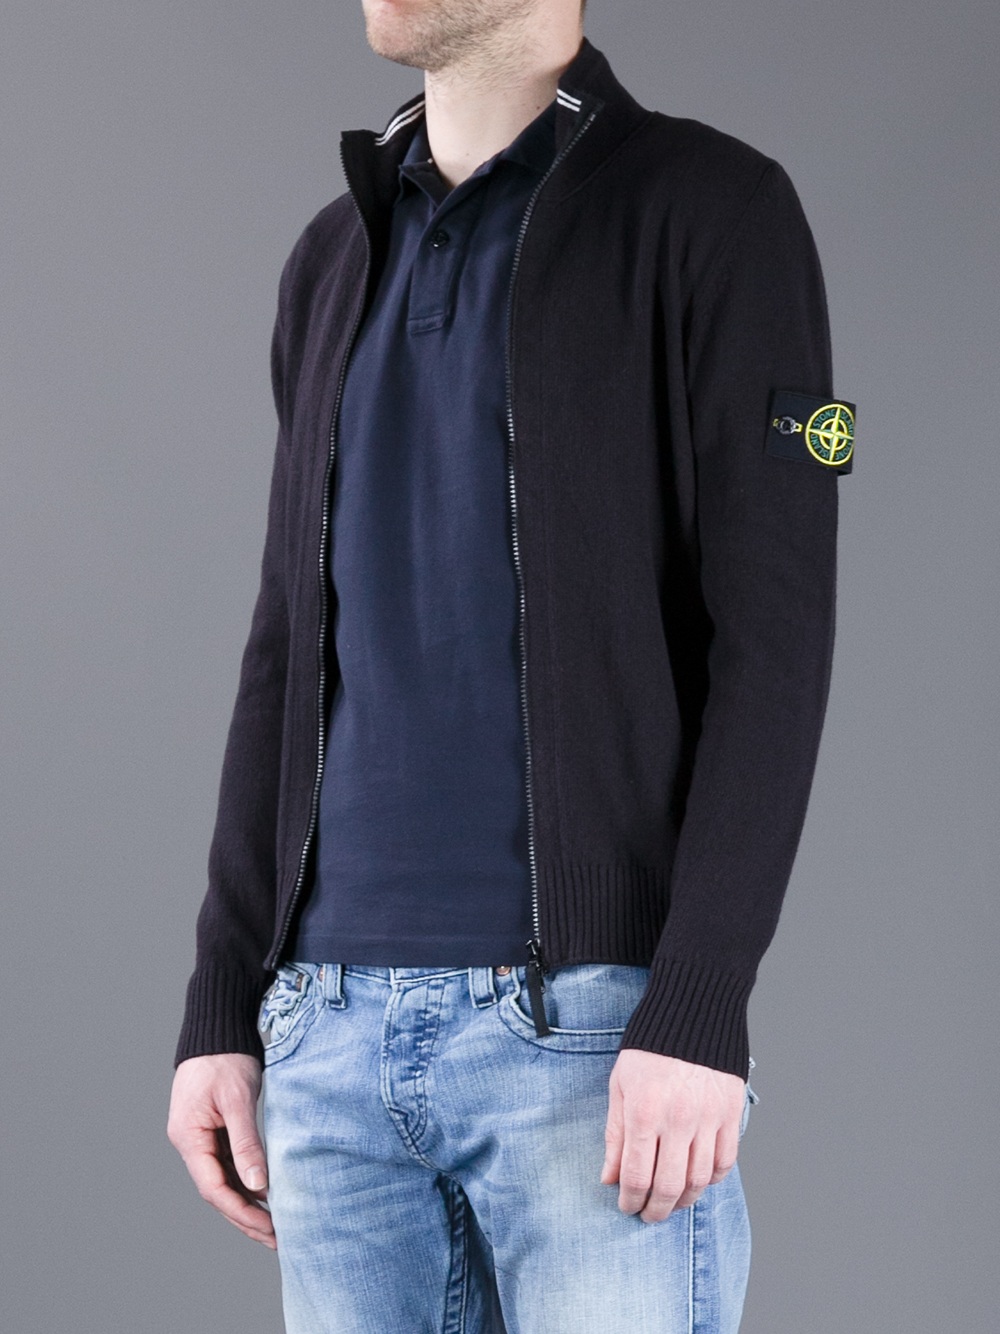 Stone Island Zip Up Knit in Black for Men - Lyst